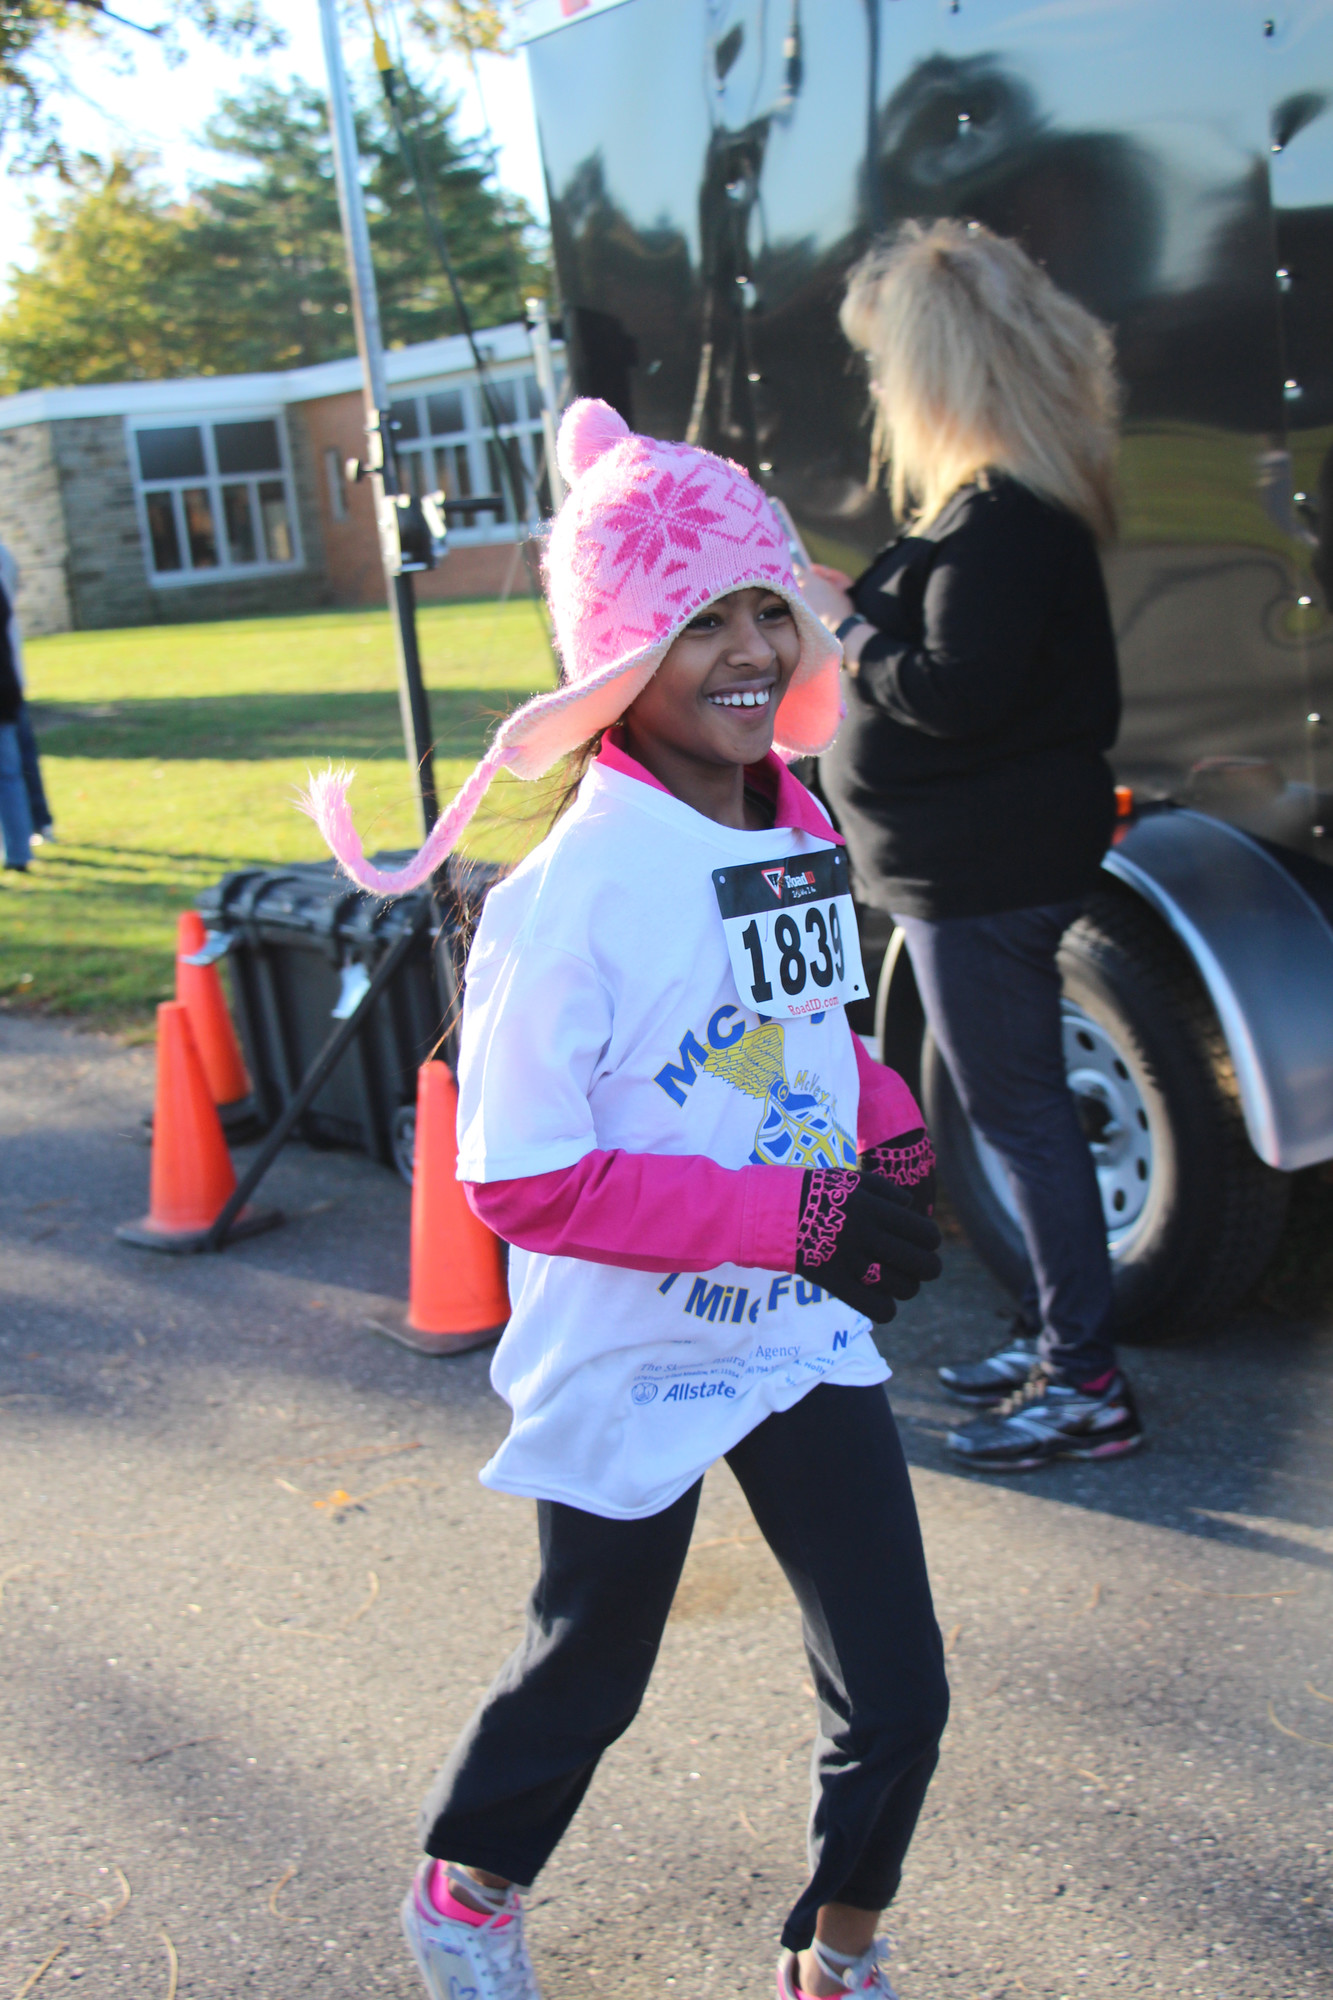 Srinidhi Chinnadurai, 9, of McVey Elementary School, couldn’t help but flash a smile as she crossed the finish line for the fun run.